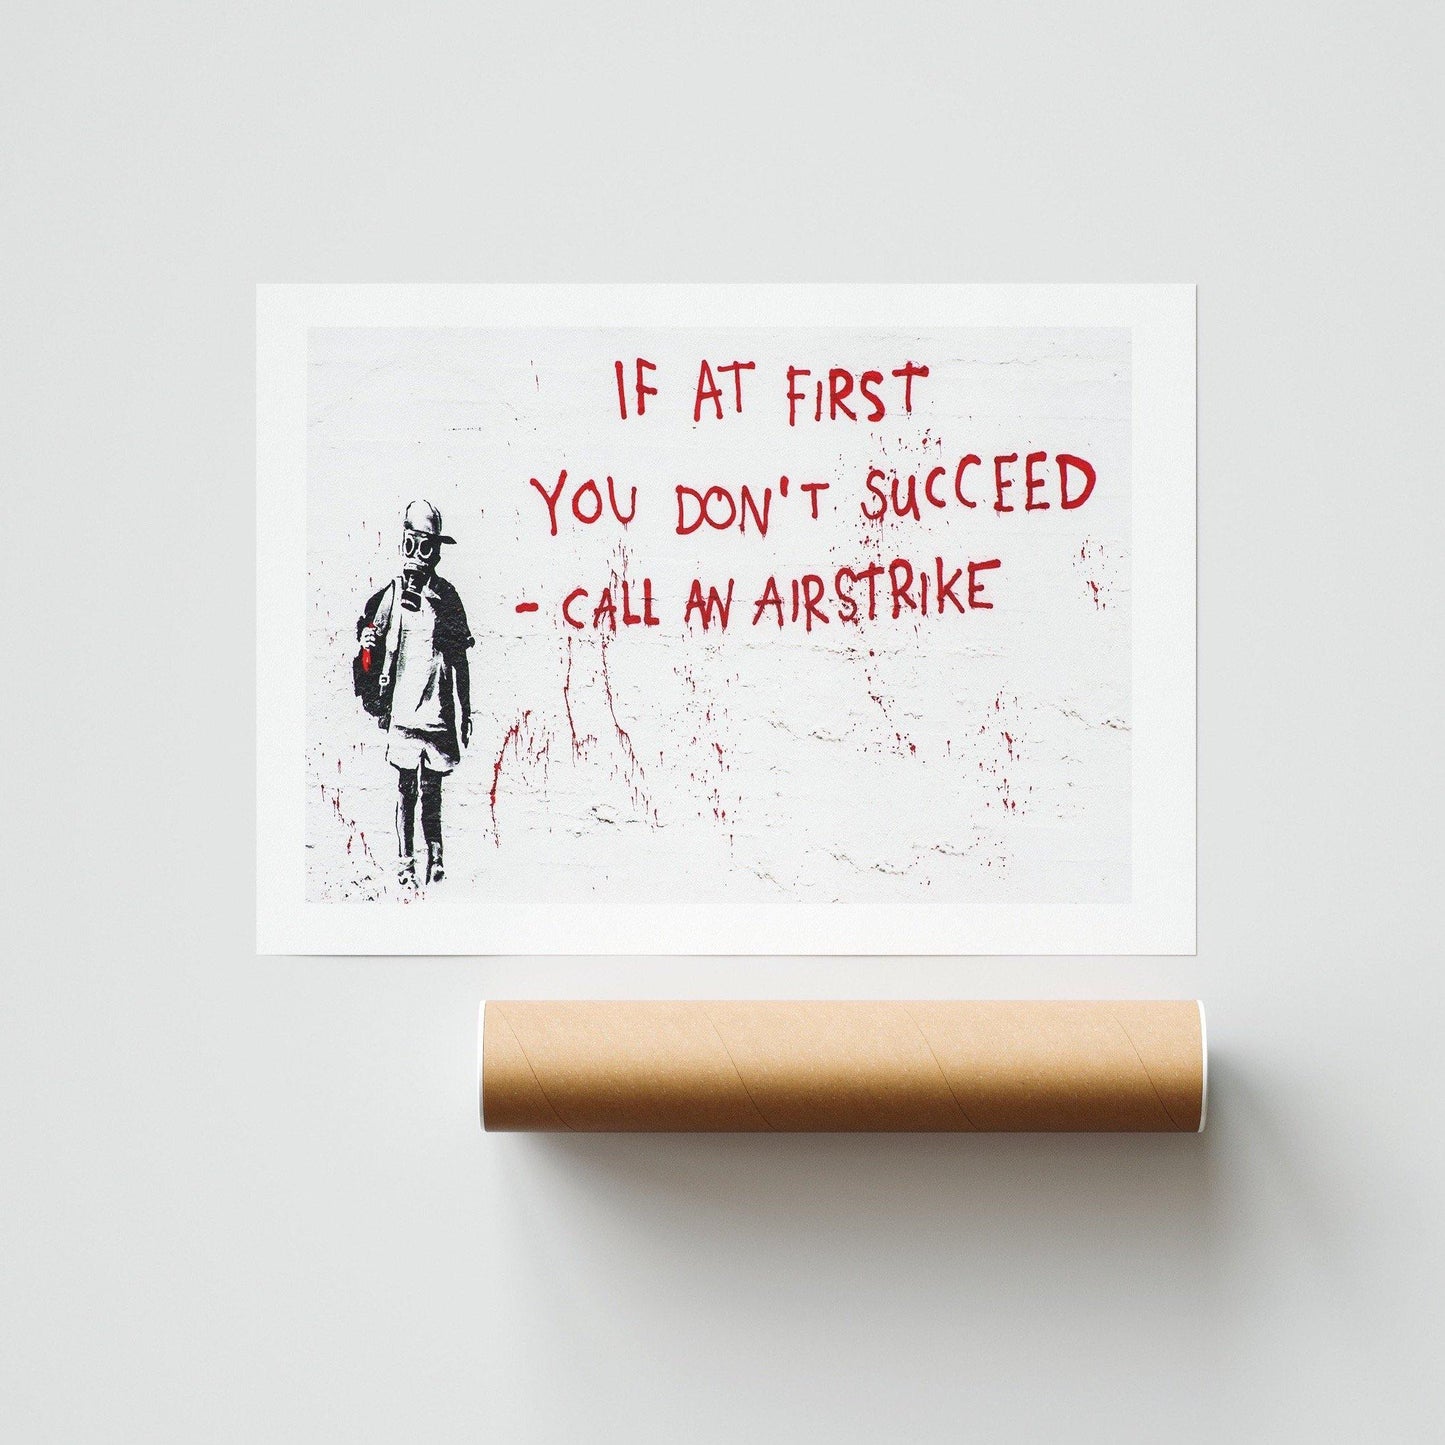 98Types Banksy Graffiti Art If You don't succeed print We believe in you, so go out and get what you want. Banksy street art to help you get there.- 98types